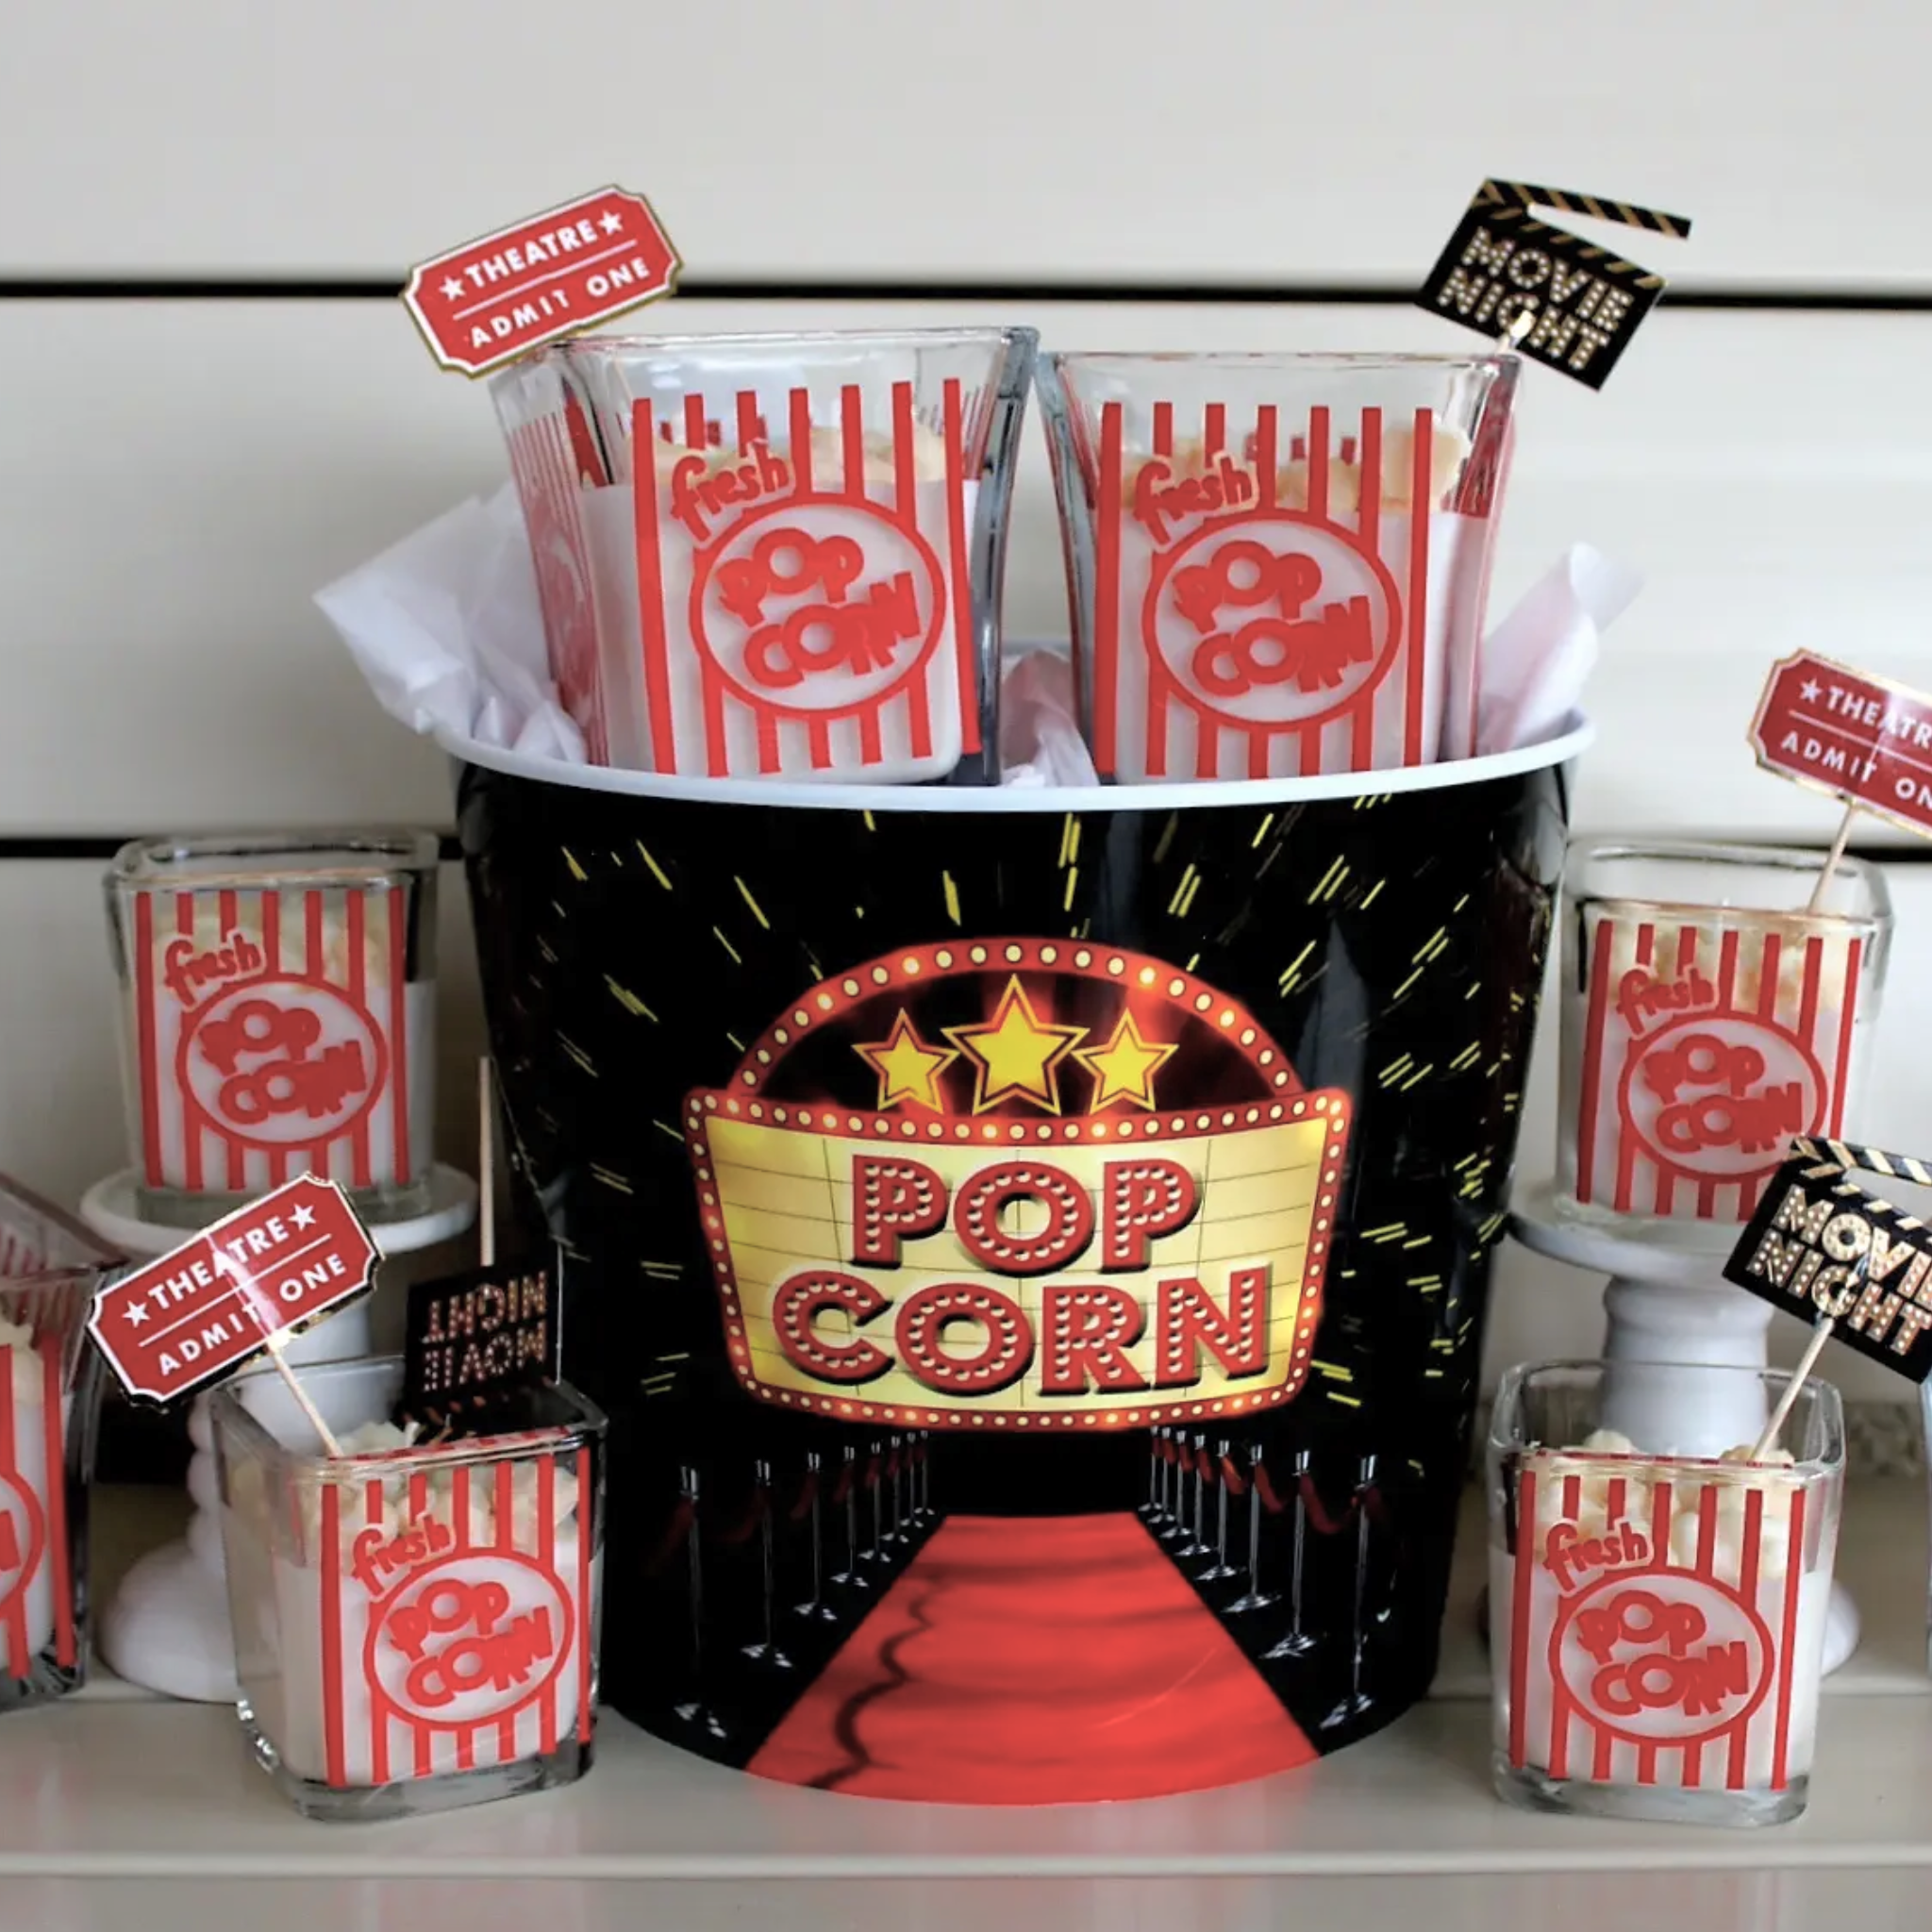 Popcorn theme scented soy wax candles